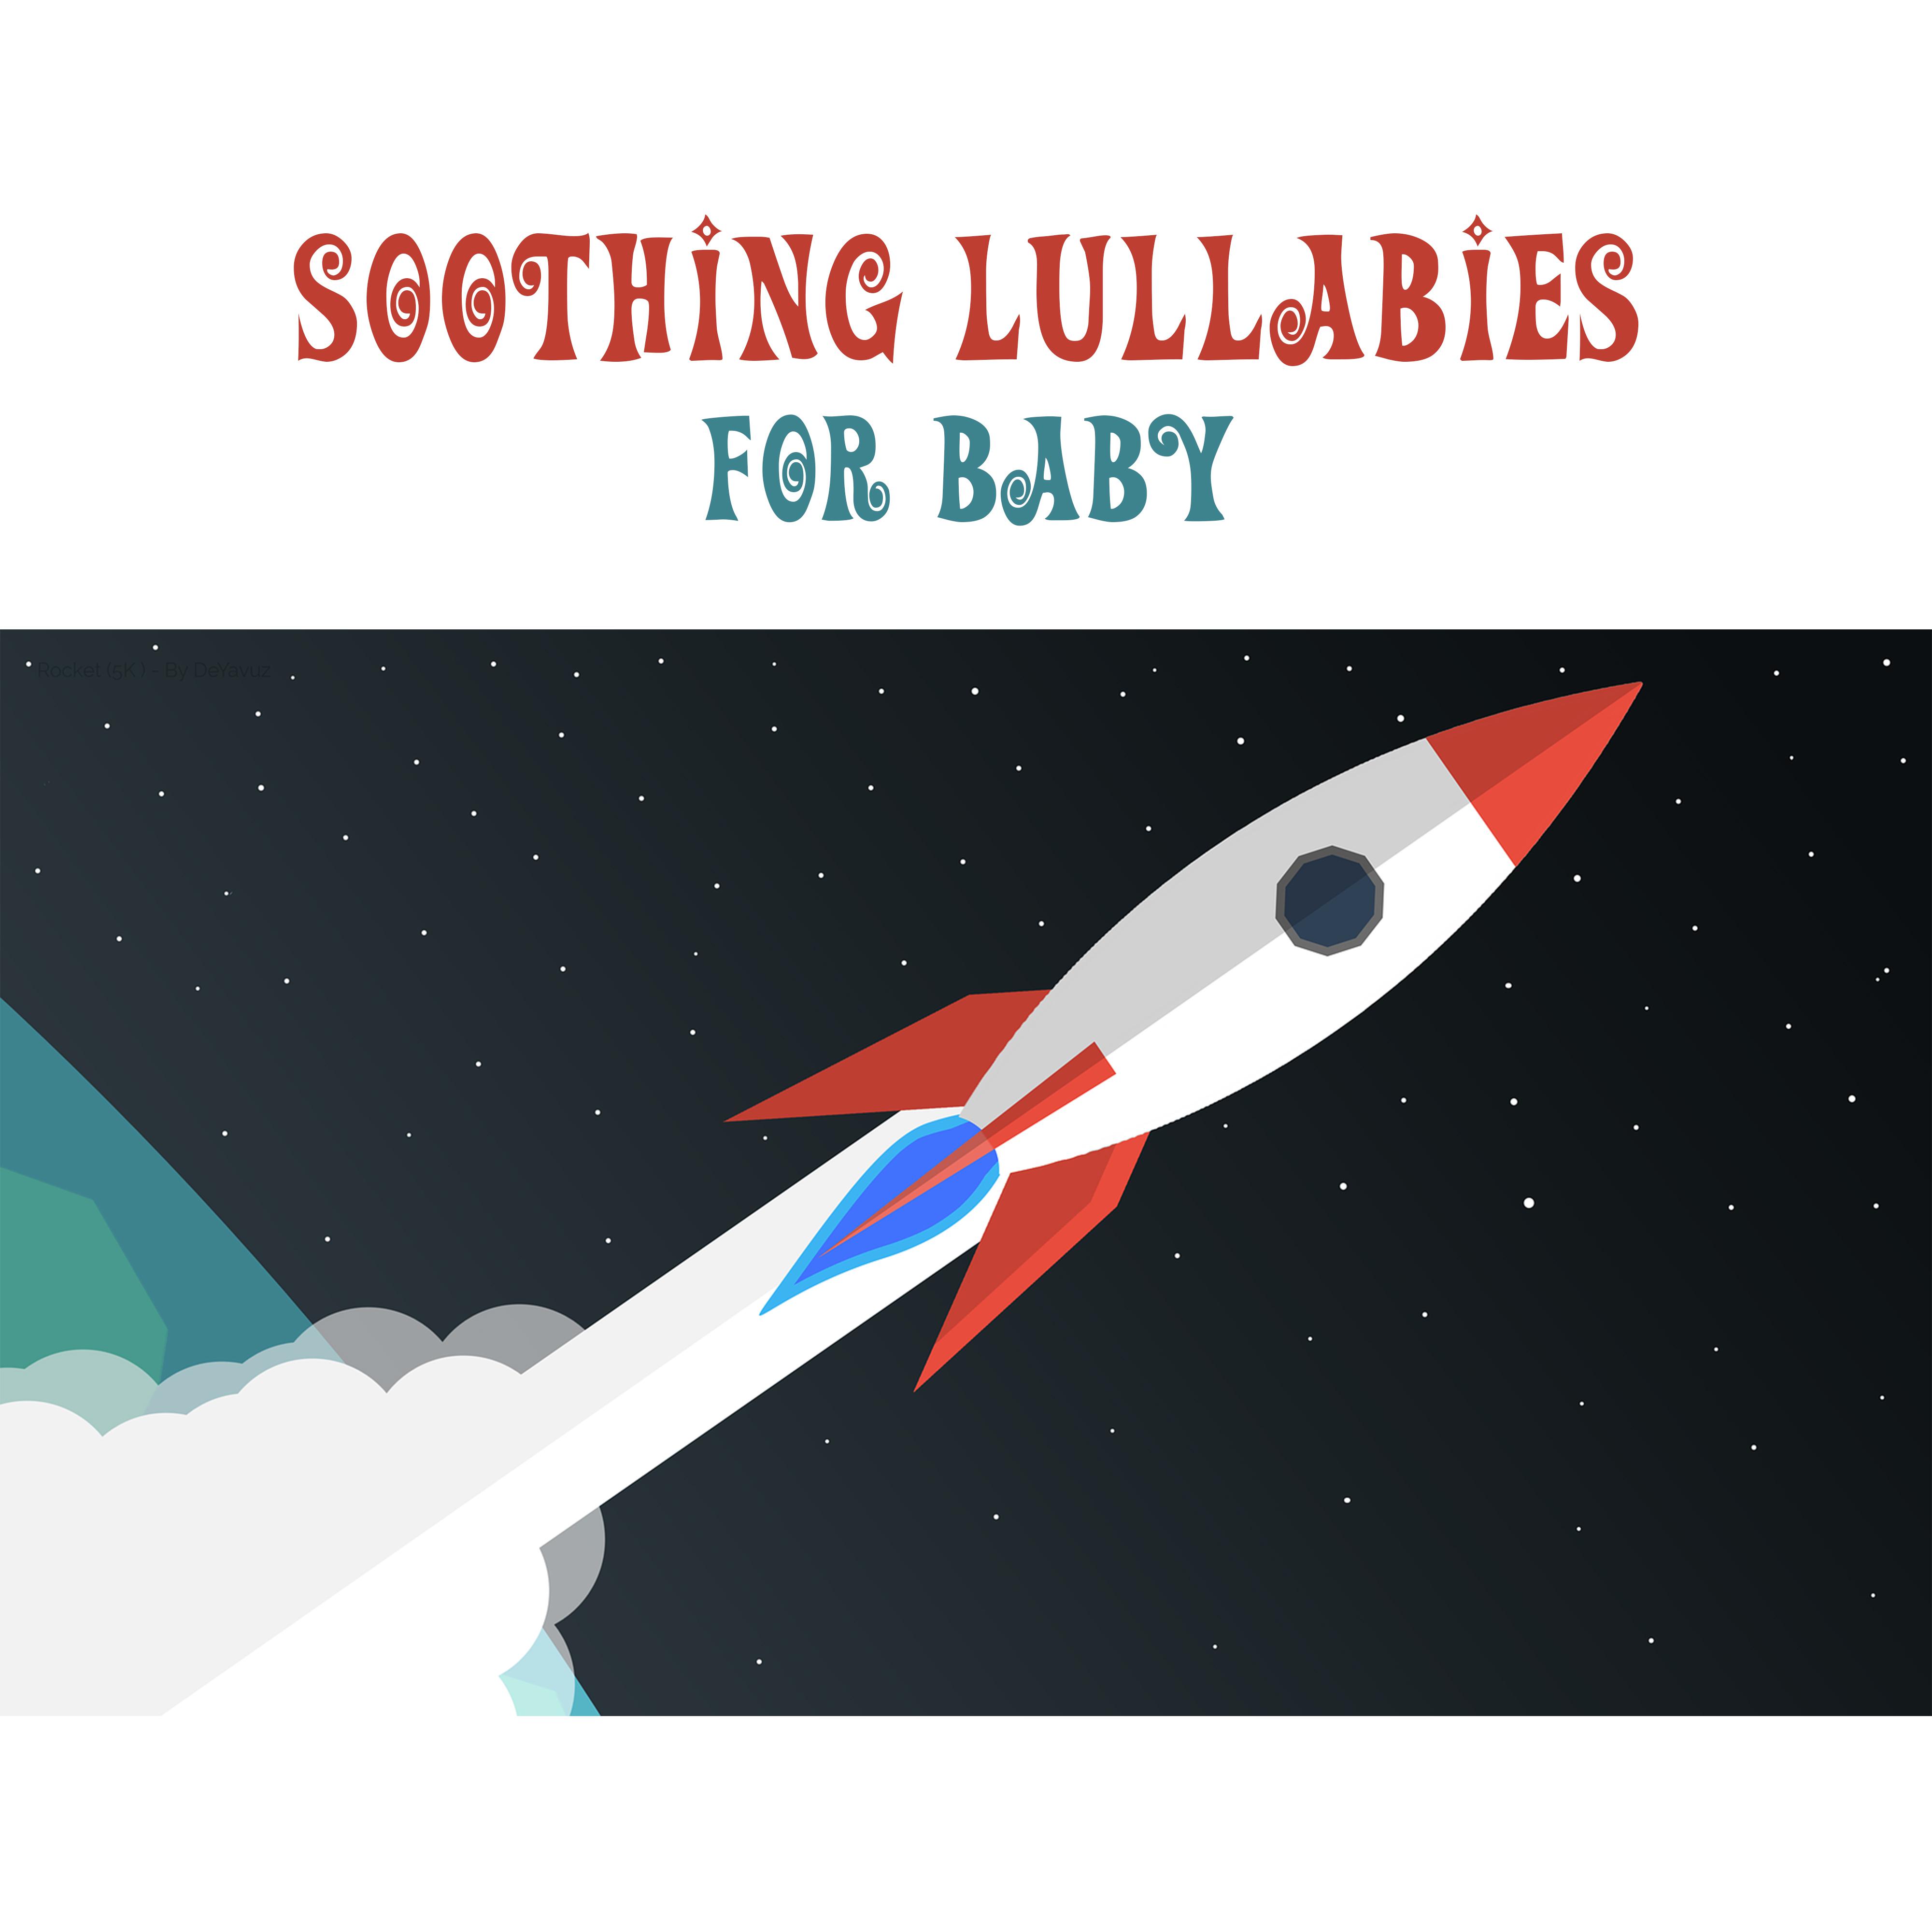 Soothing Lullabies for Baby – Deep Dreams, Calm Nap, Stress Relief, Healing Music at Goodnight, Gentle Melodies for Kids, Sleeping Baby